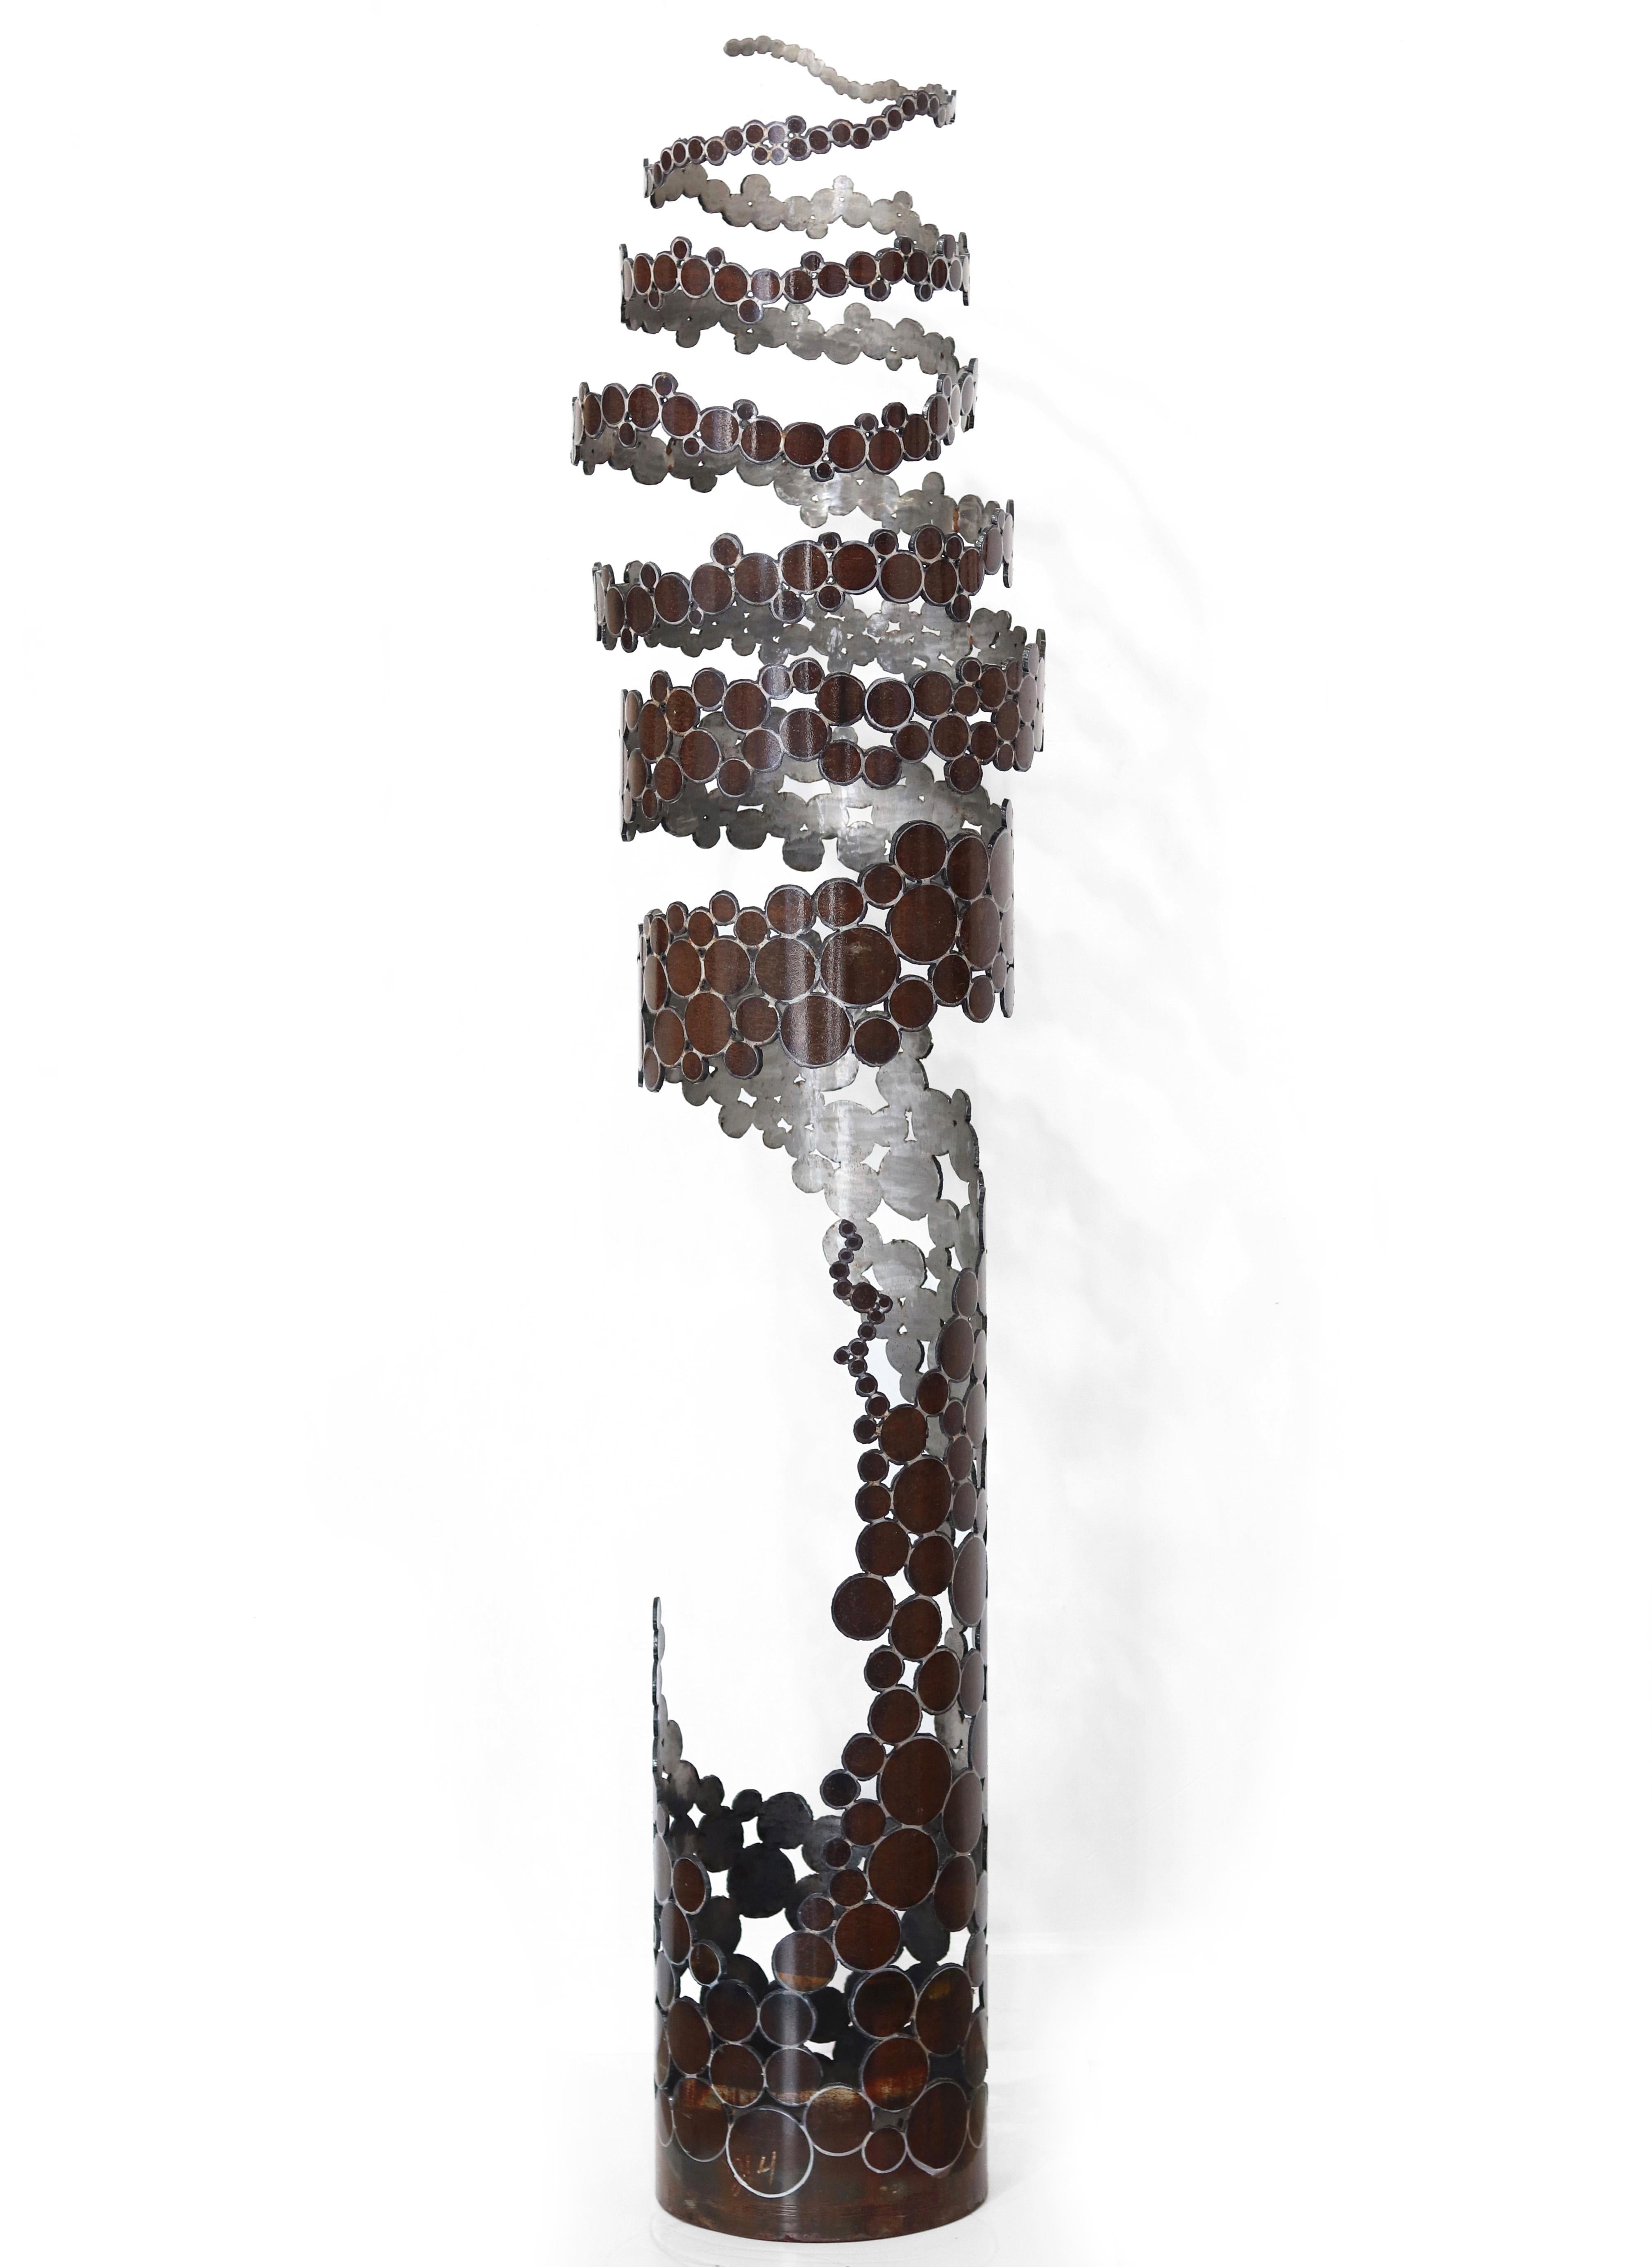 Soothing Repetition  -  Large Oversized Steel Sculpture for Outdoors and Indoors For Sale 2